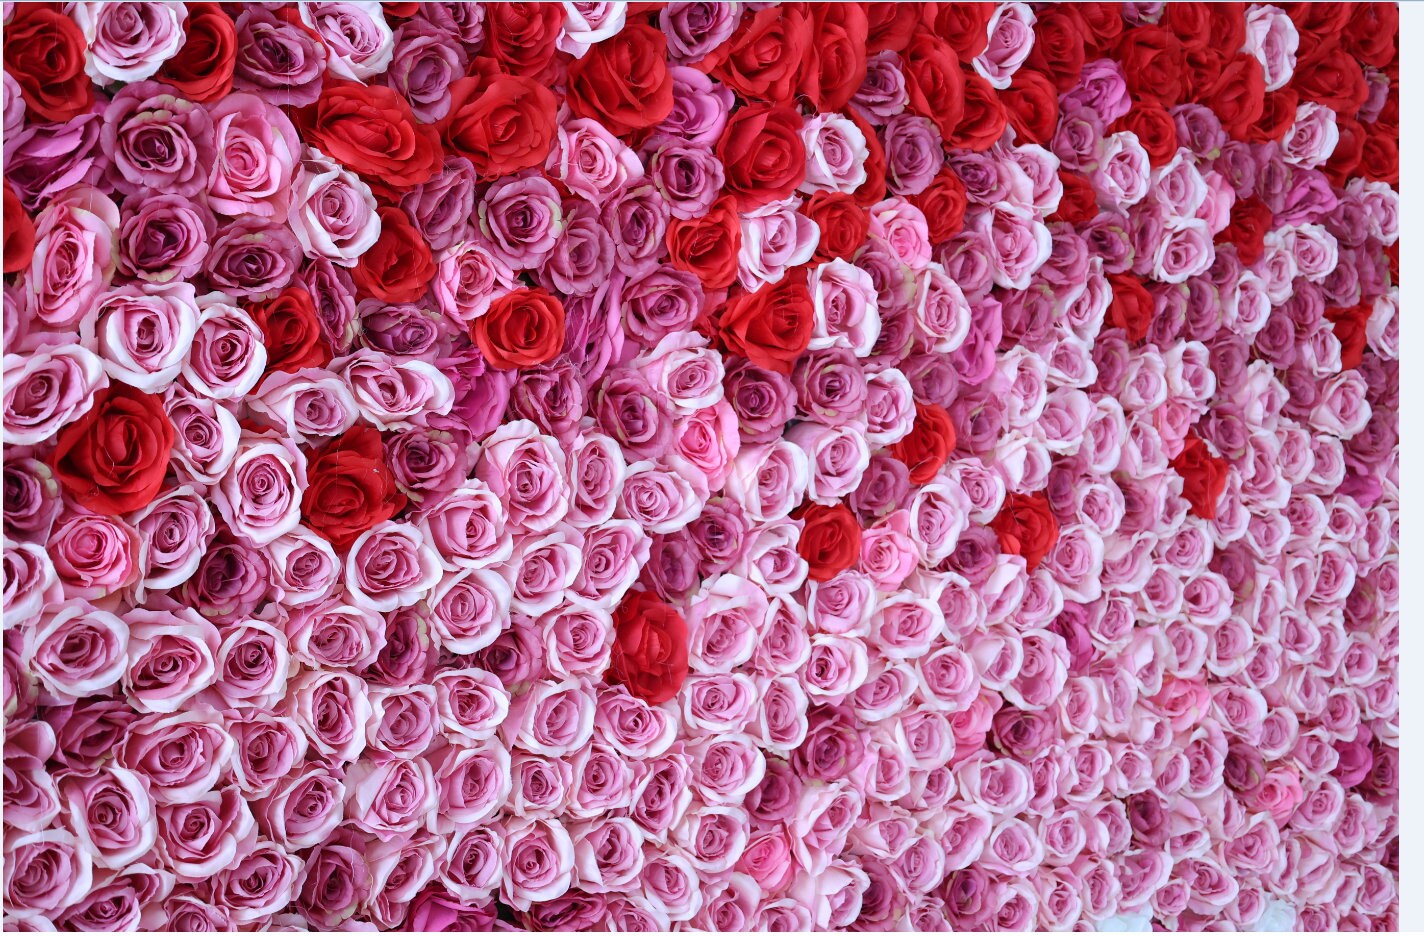 New Design Gradul Colors Flower Wall For Wedding Arrangement Event Salon Party Photography Backdrop Fabric Rolling Up Curtain Fabric Cloth